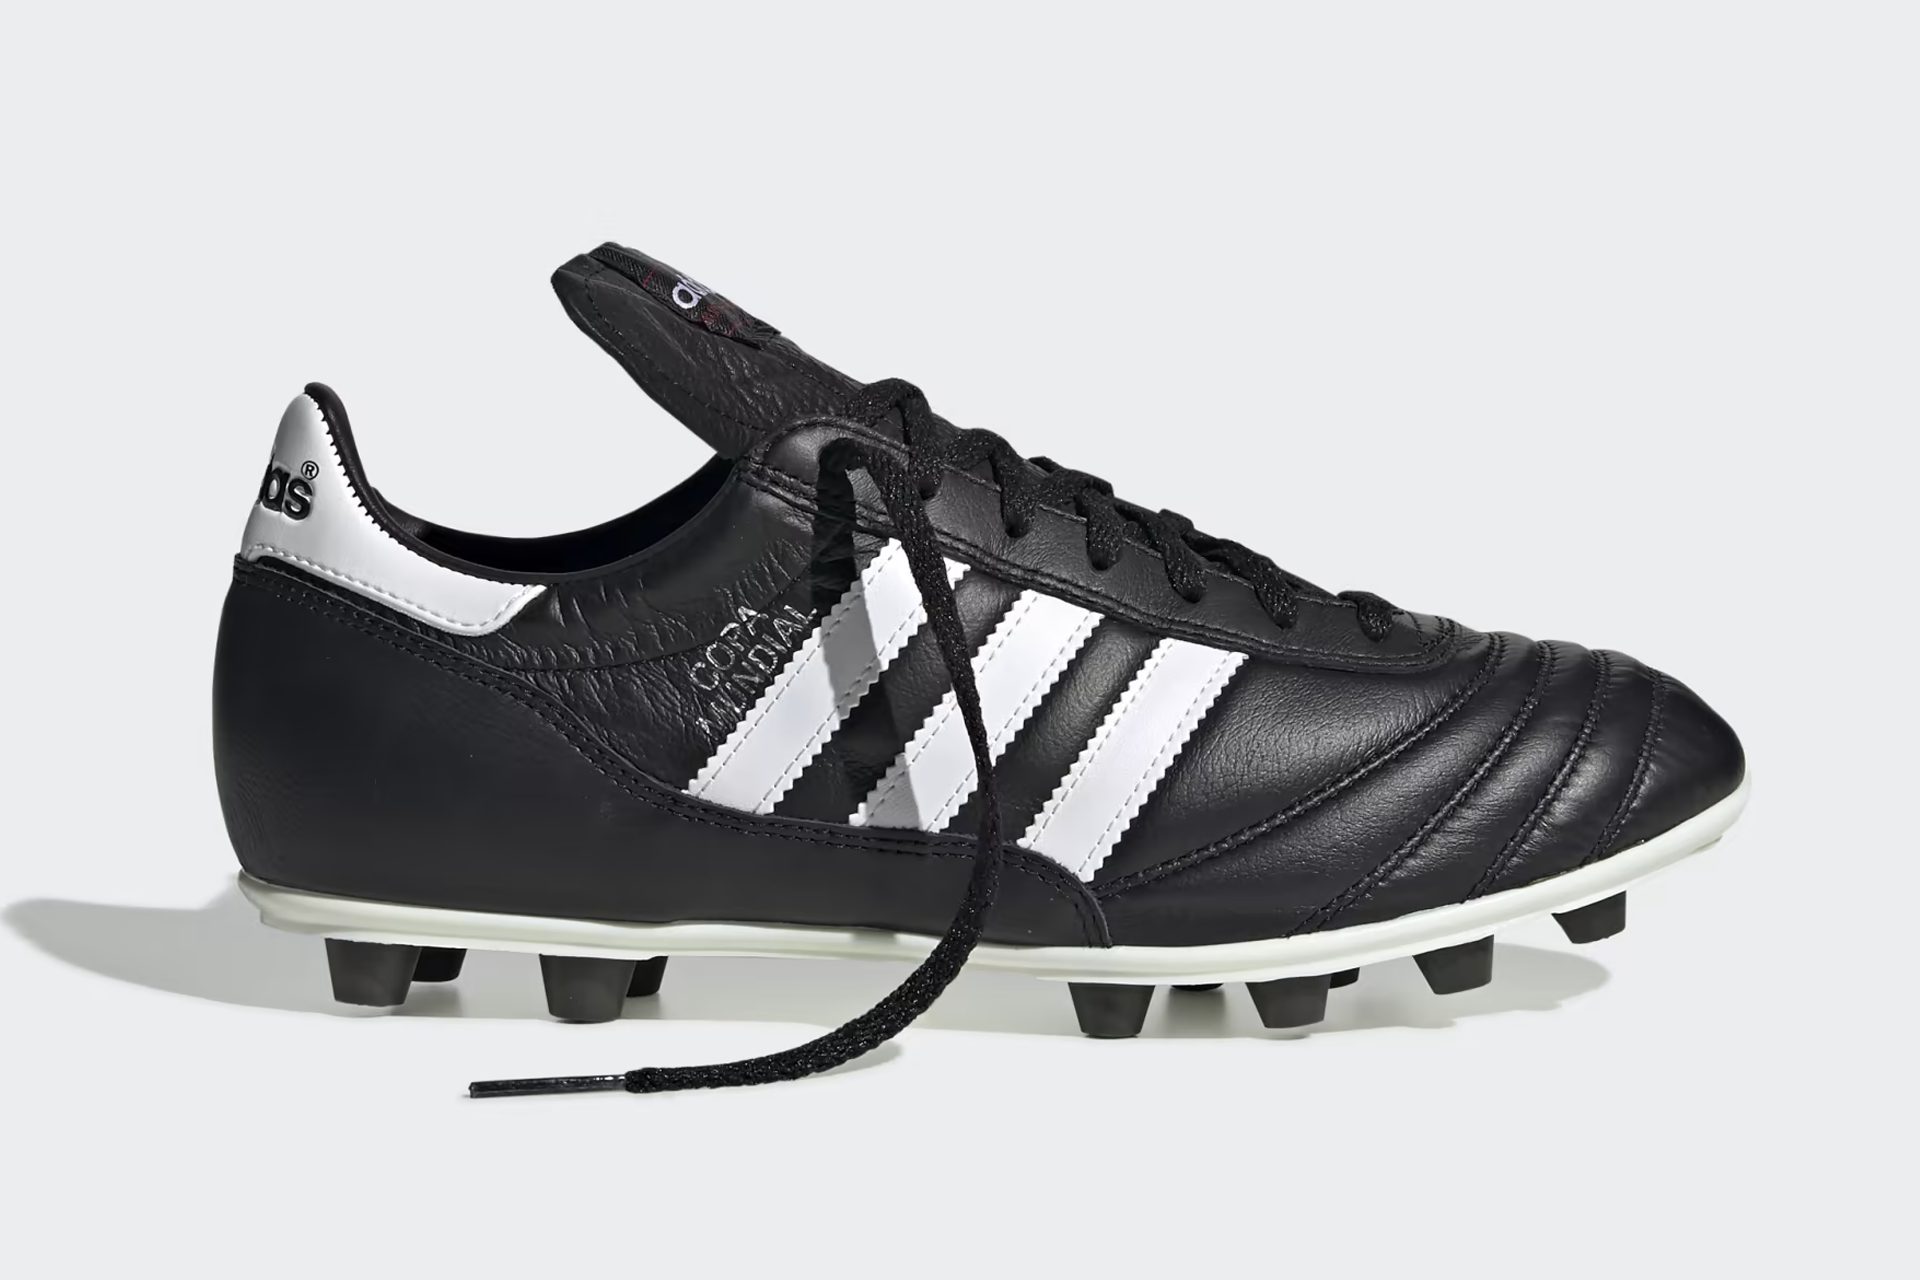 Adidas Copa Mundial leather rugby boots